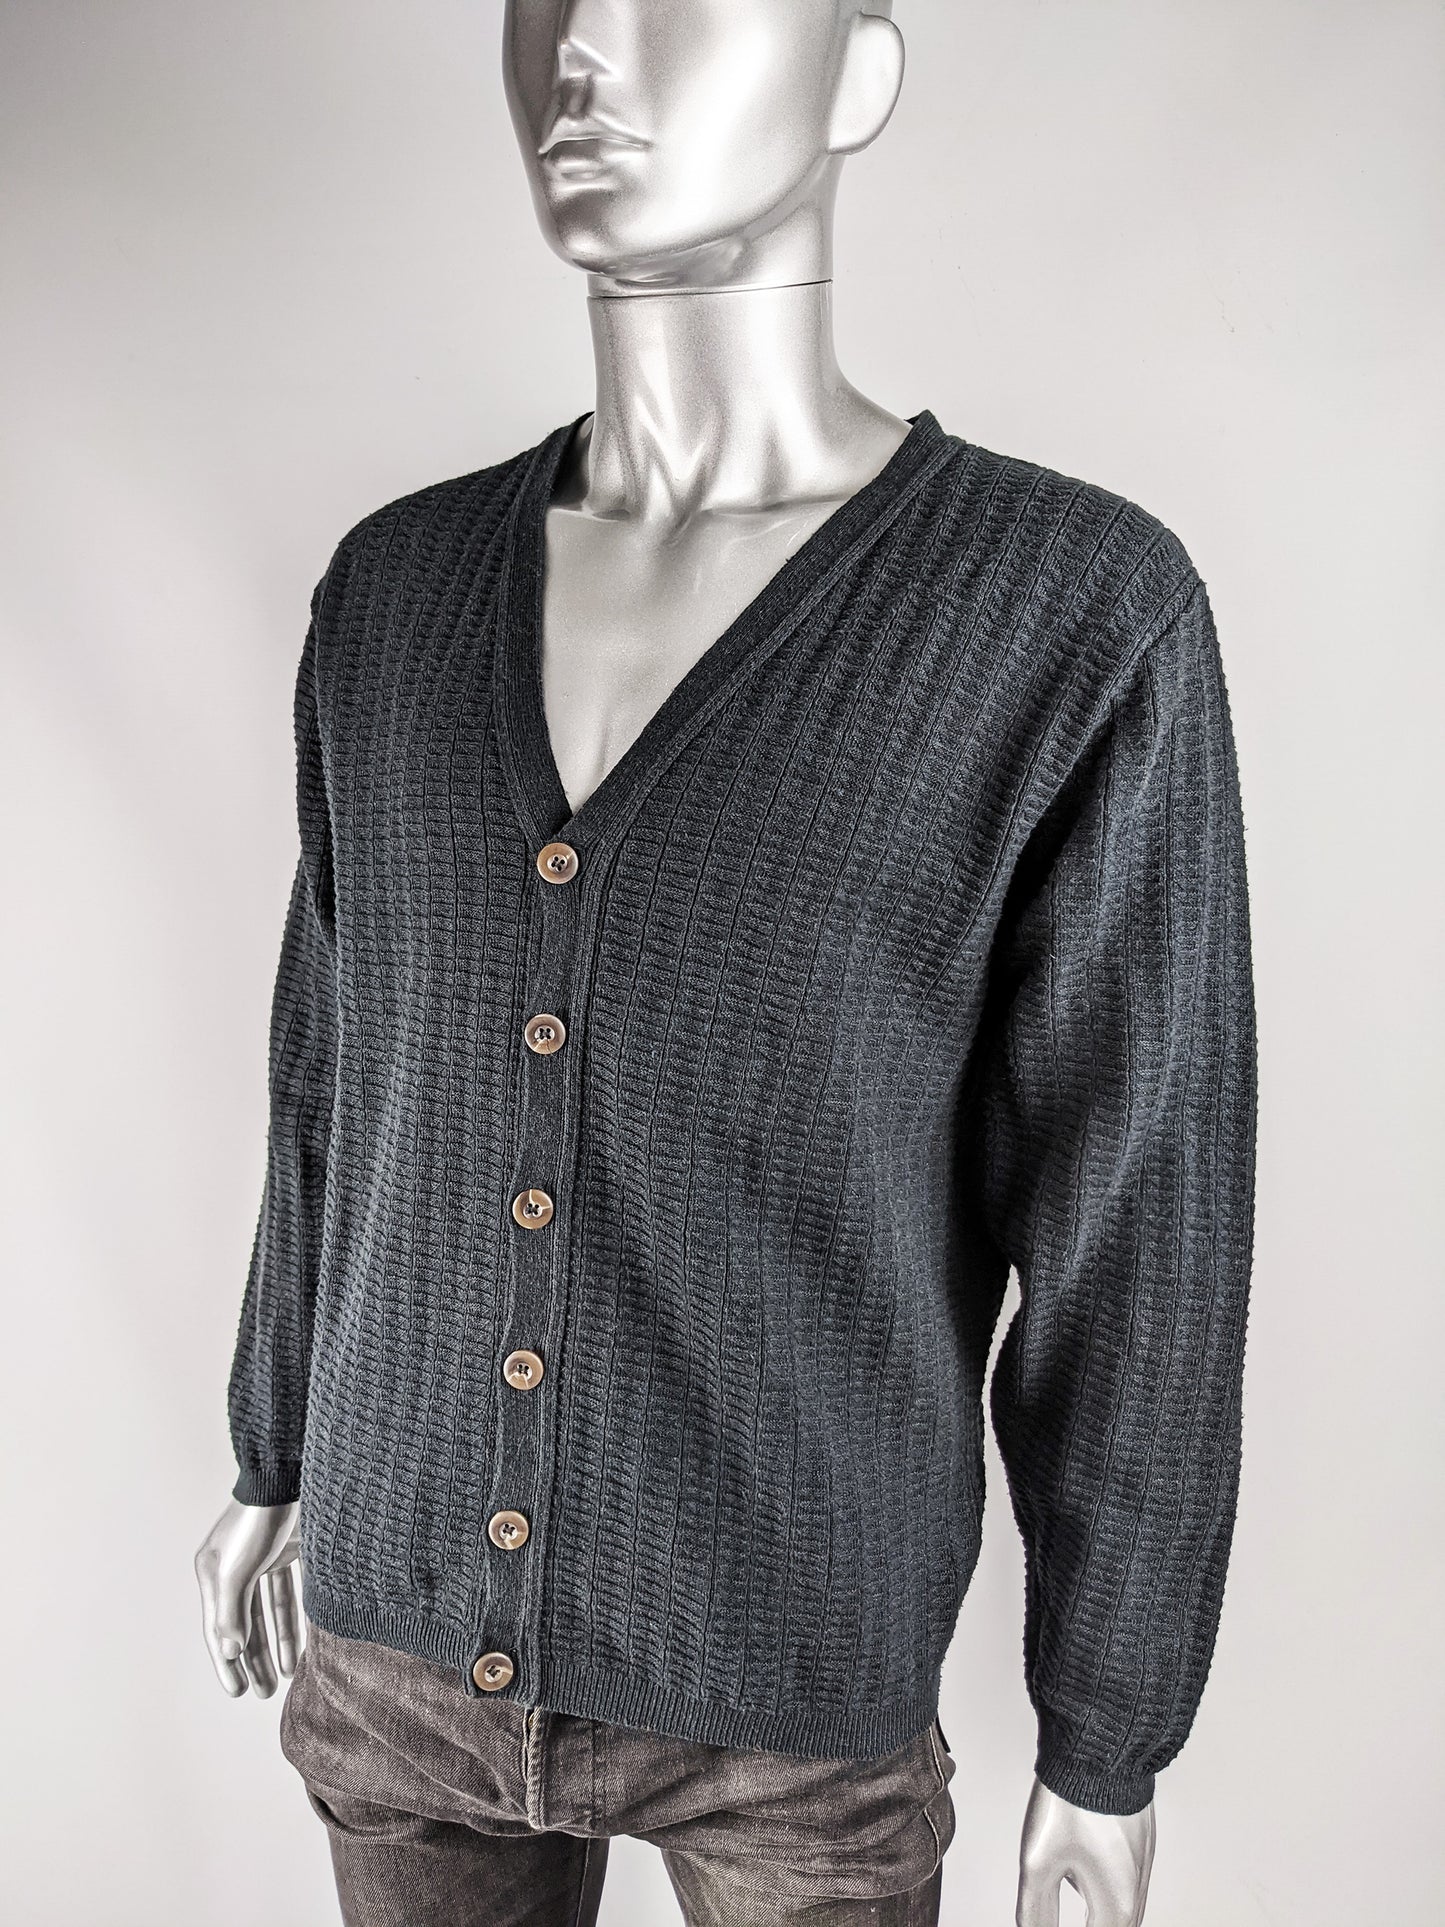 Mens Vintage Textured Knit Slouchy Cardigan, 1980s